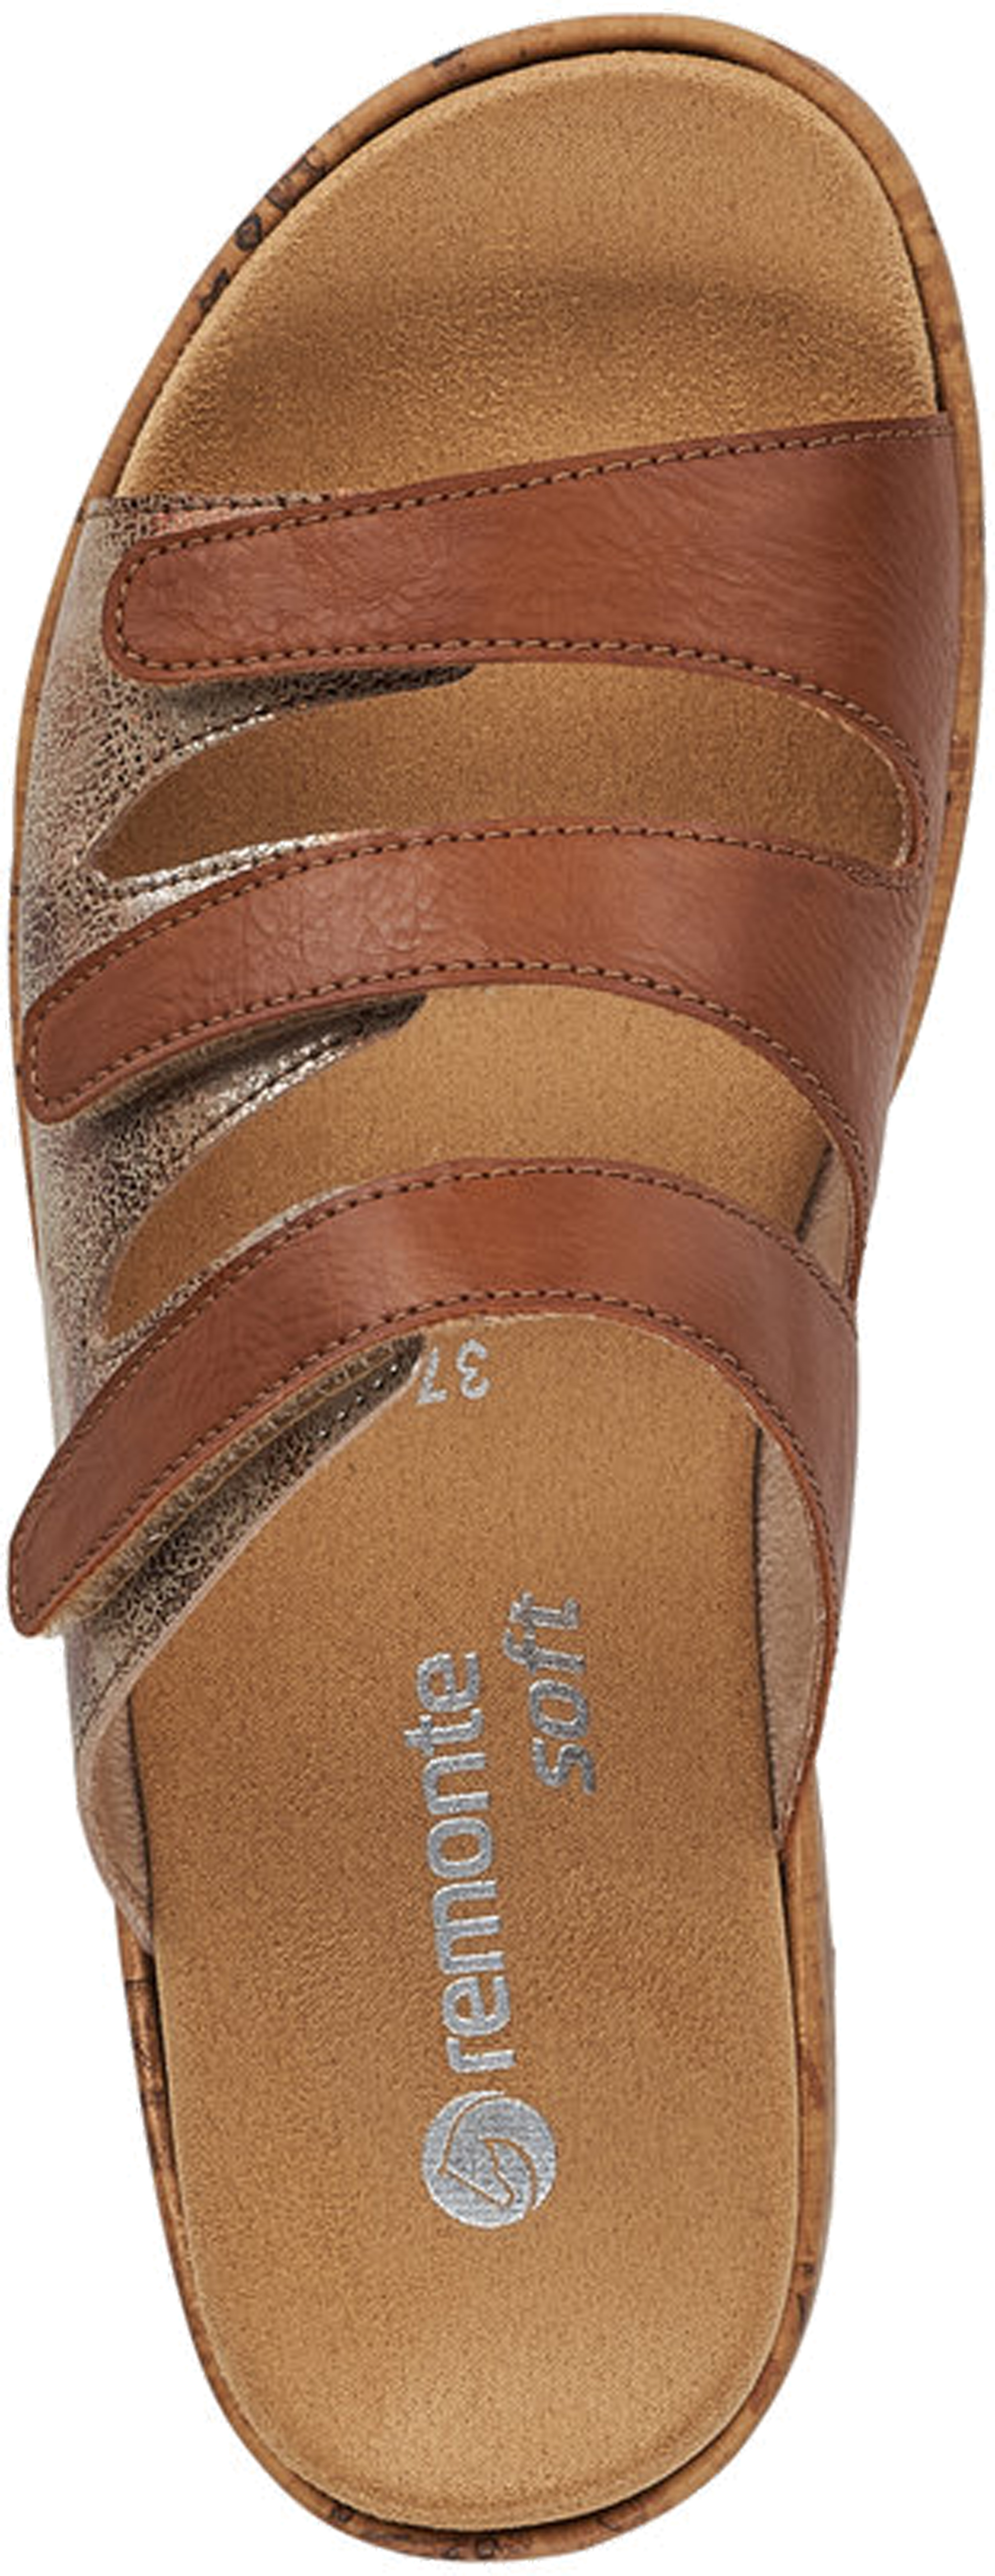 Remonte Sandals | UK Stock, Shipped from Cornwall - SandalShop